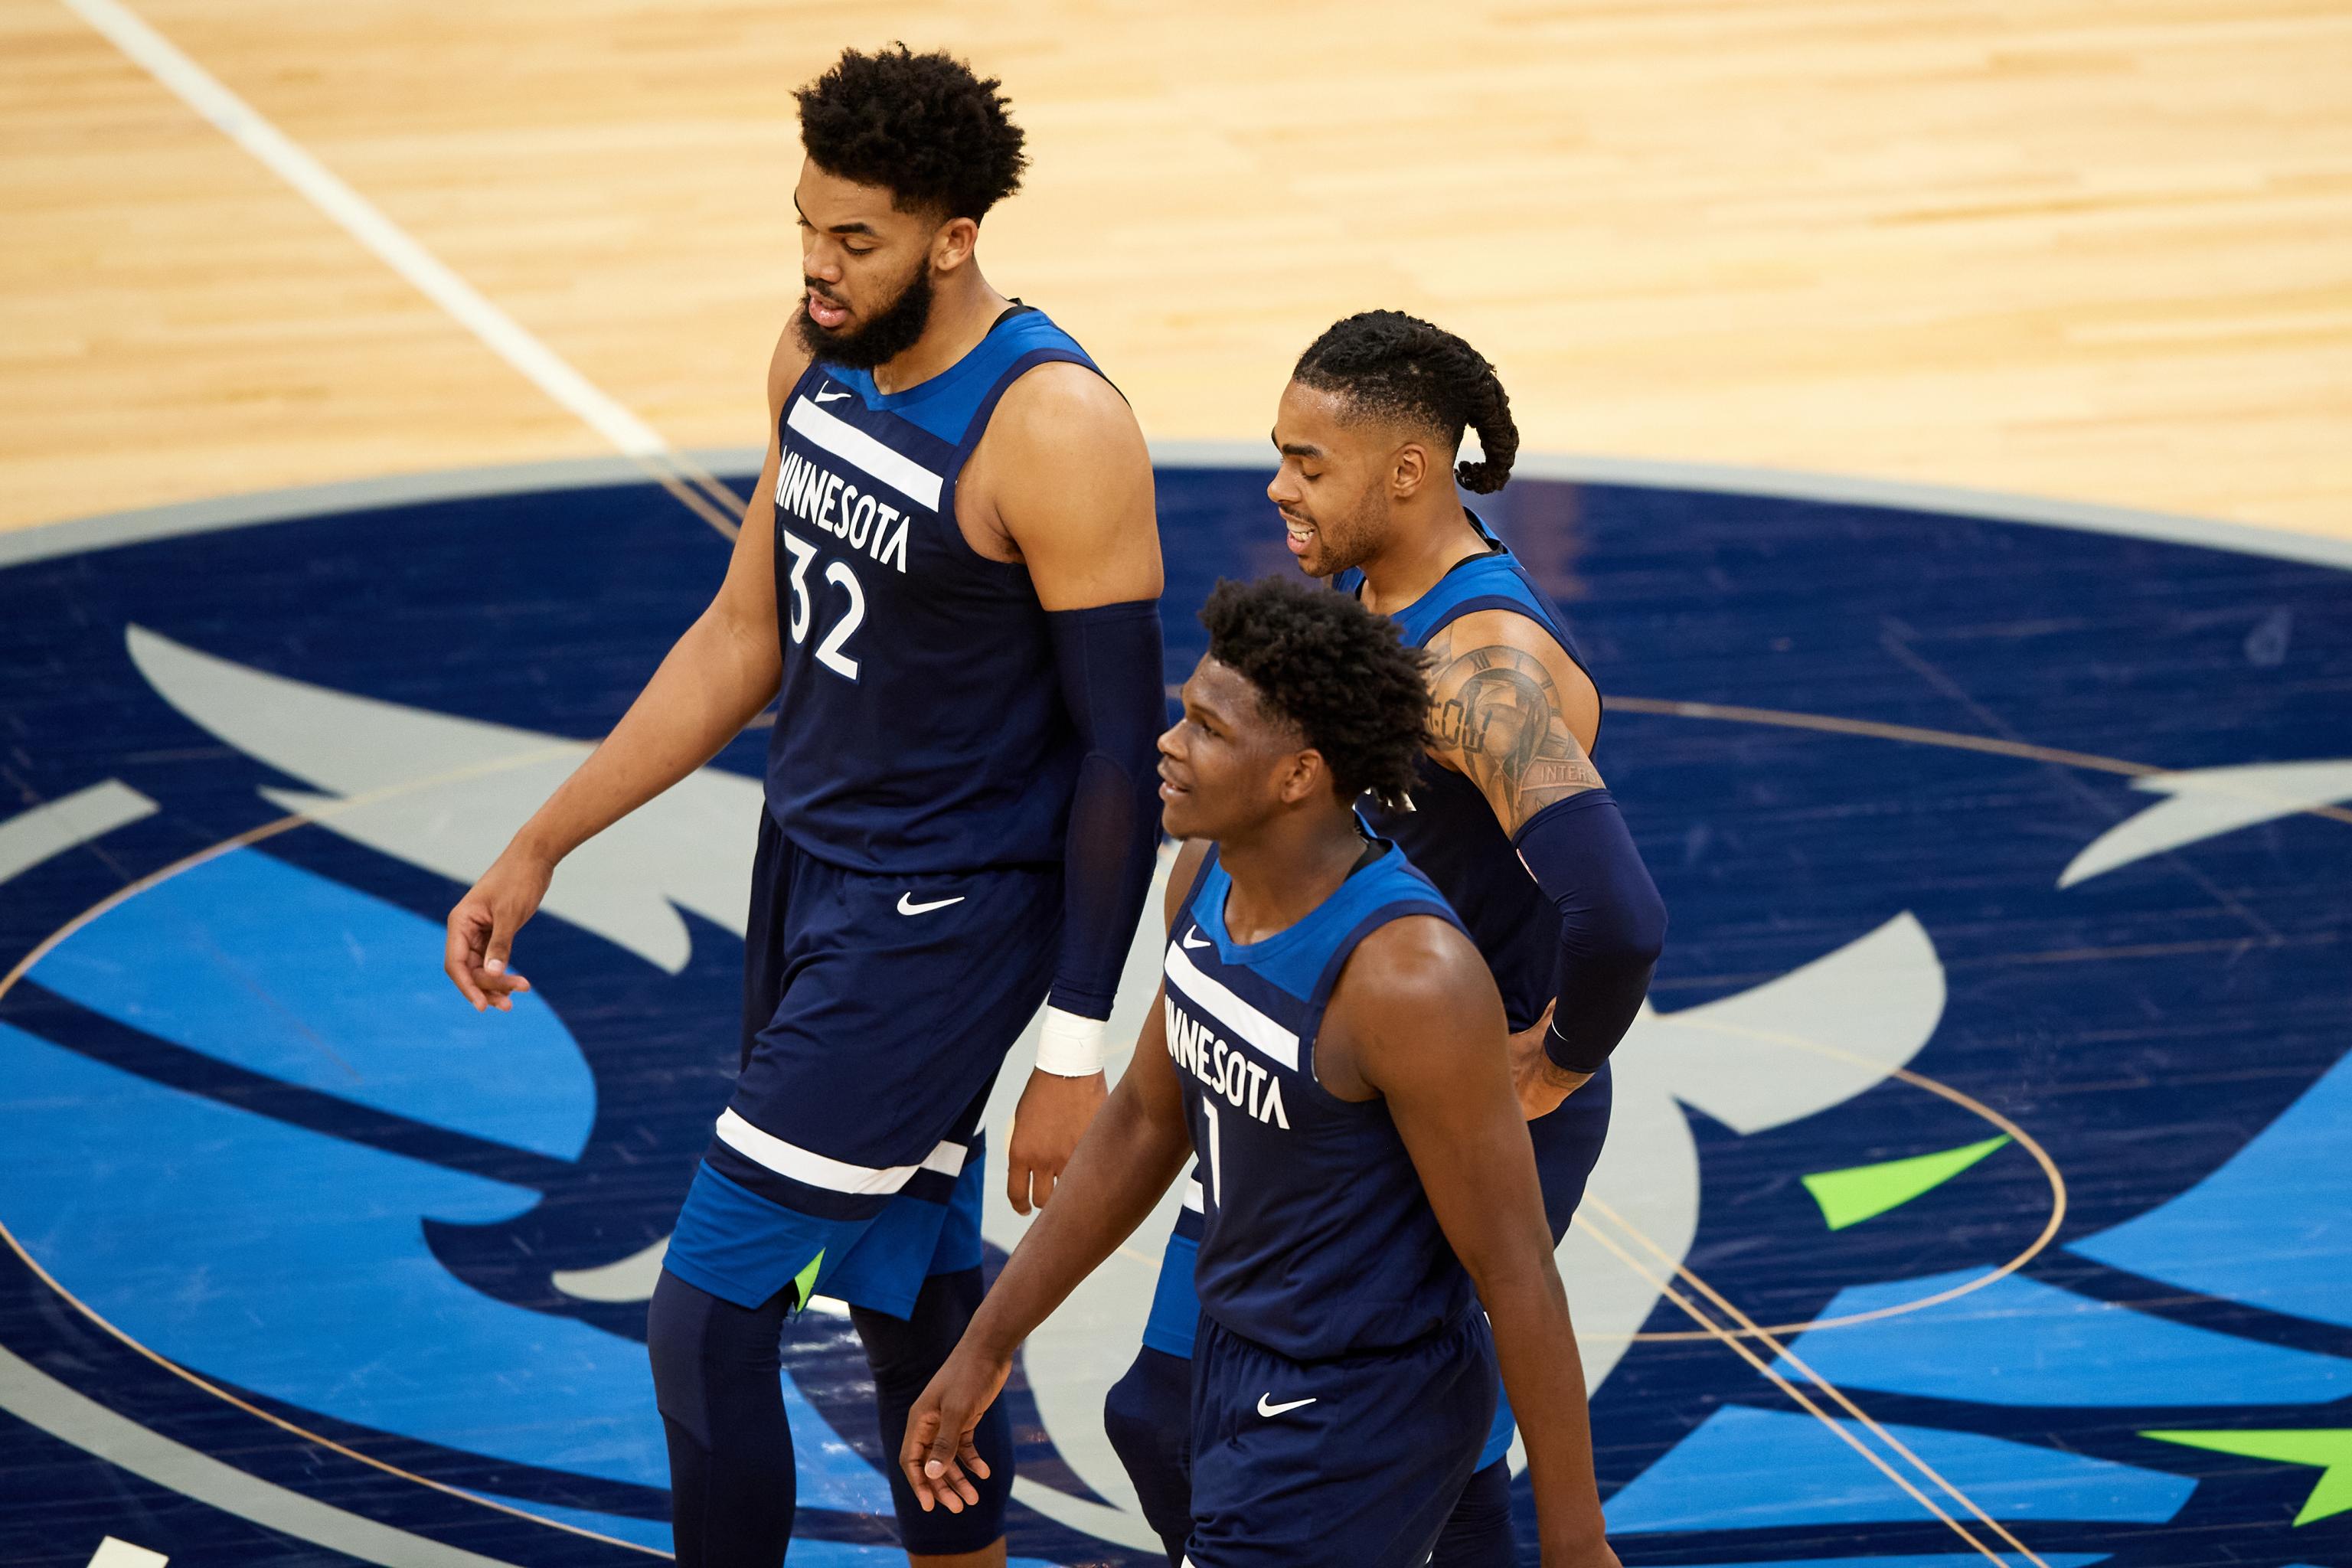 Executives reportedly believe Karl-Anthony Towns may be out of